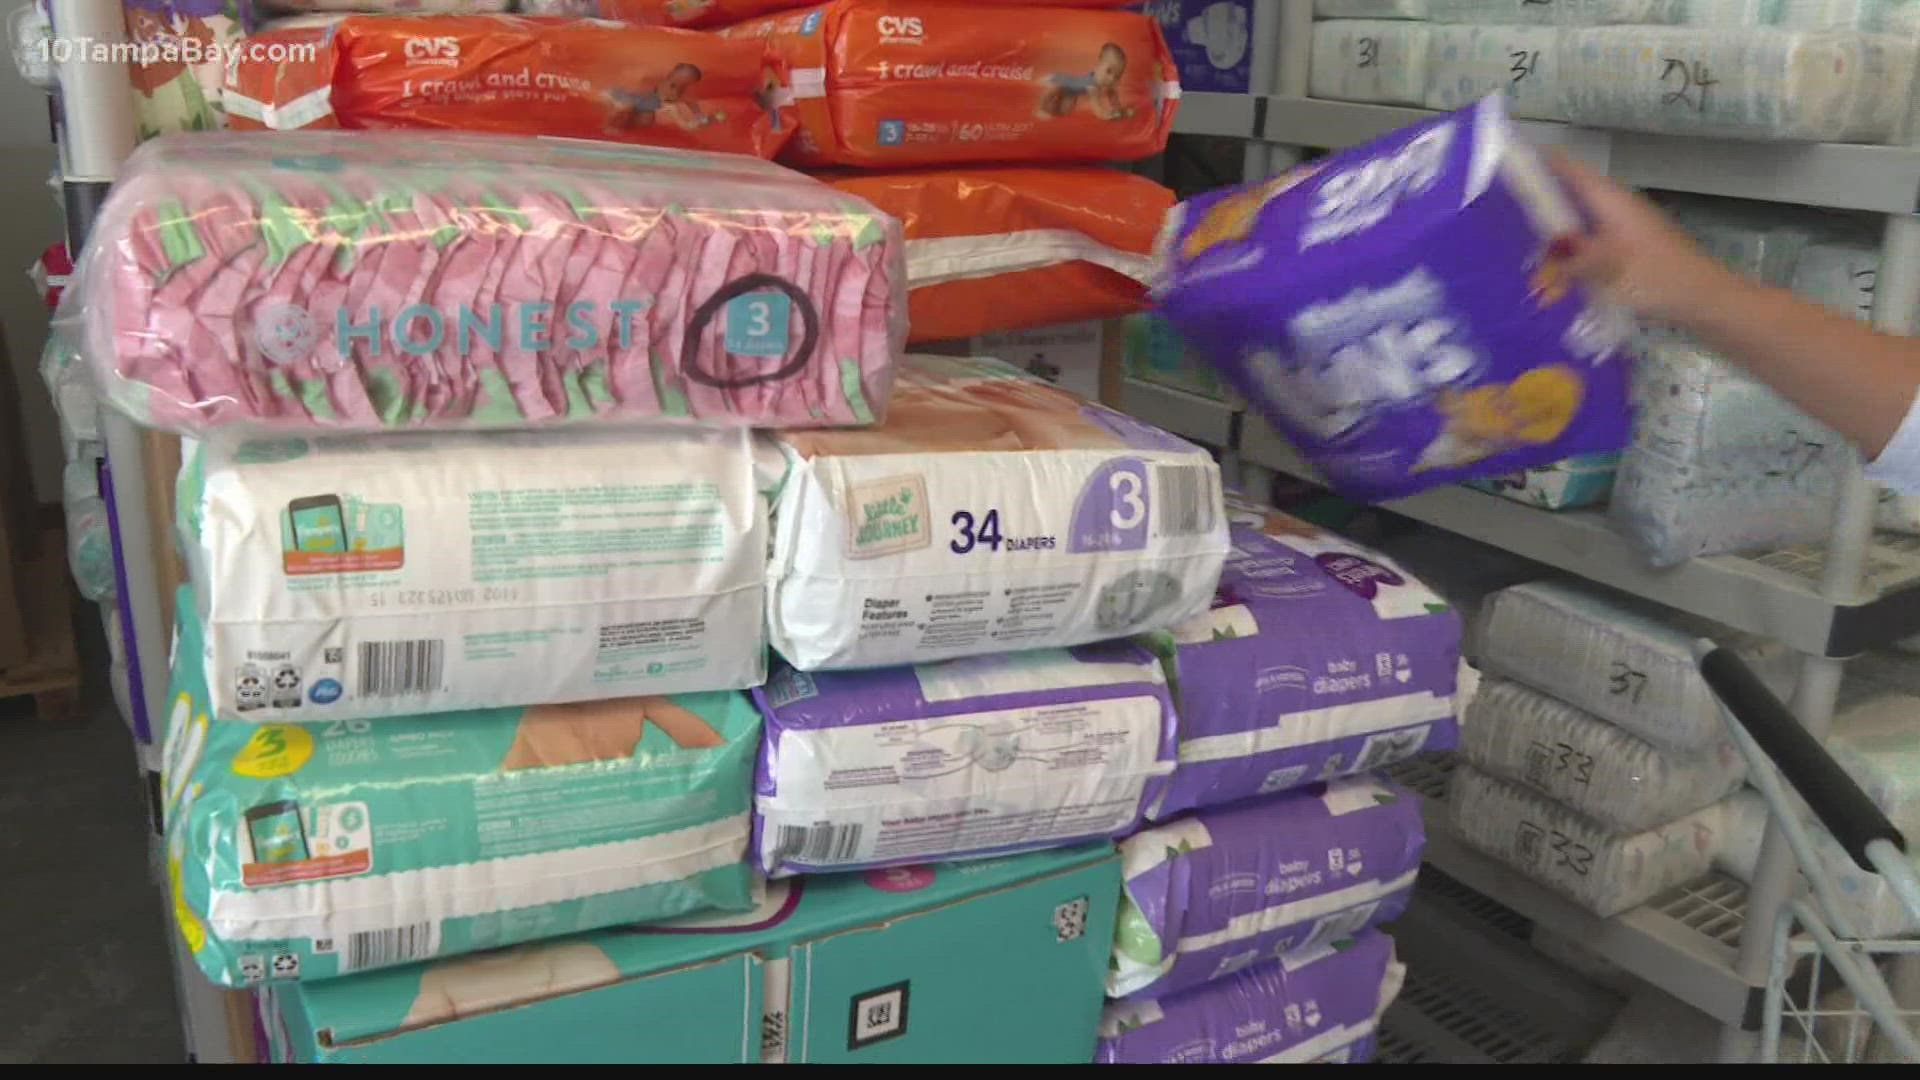 Nonprofits are trying to help keep families stocked with new diapers as some see shortages.